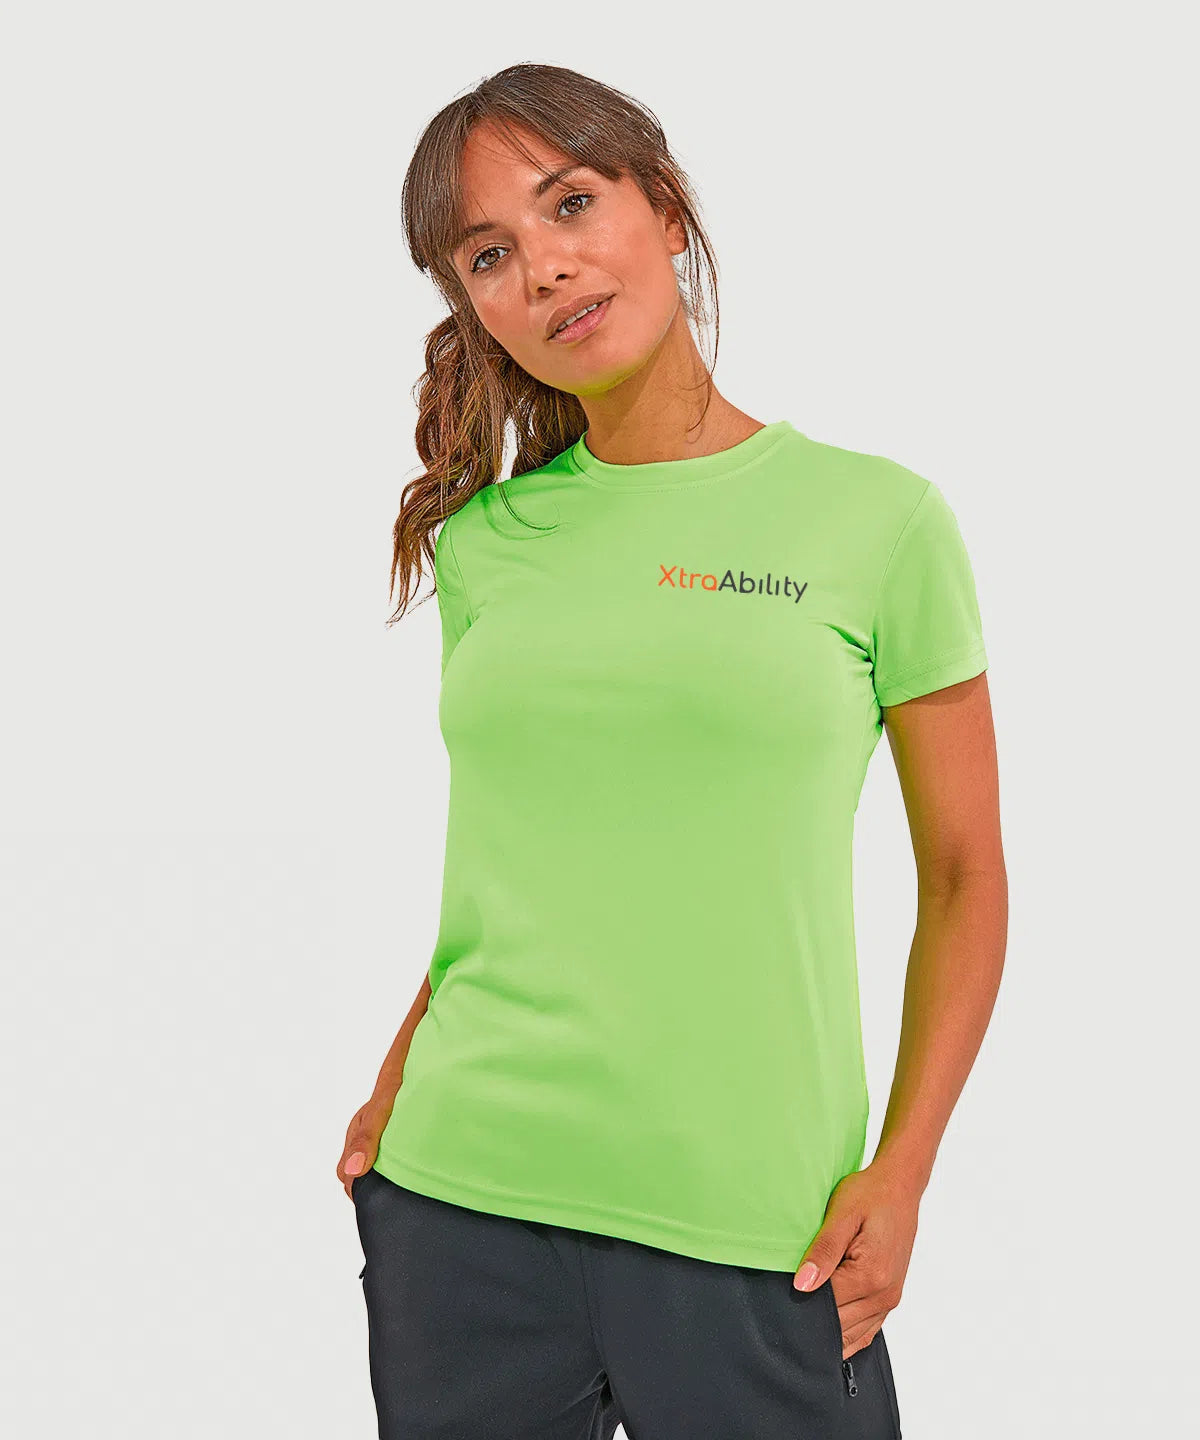 Women's Recycled Performance T-shirt XtraAbility